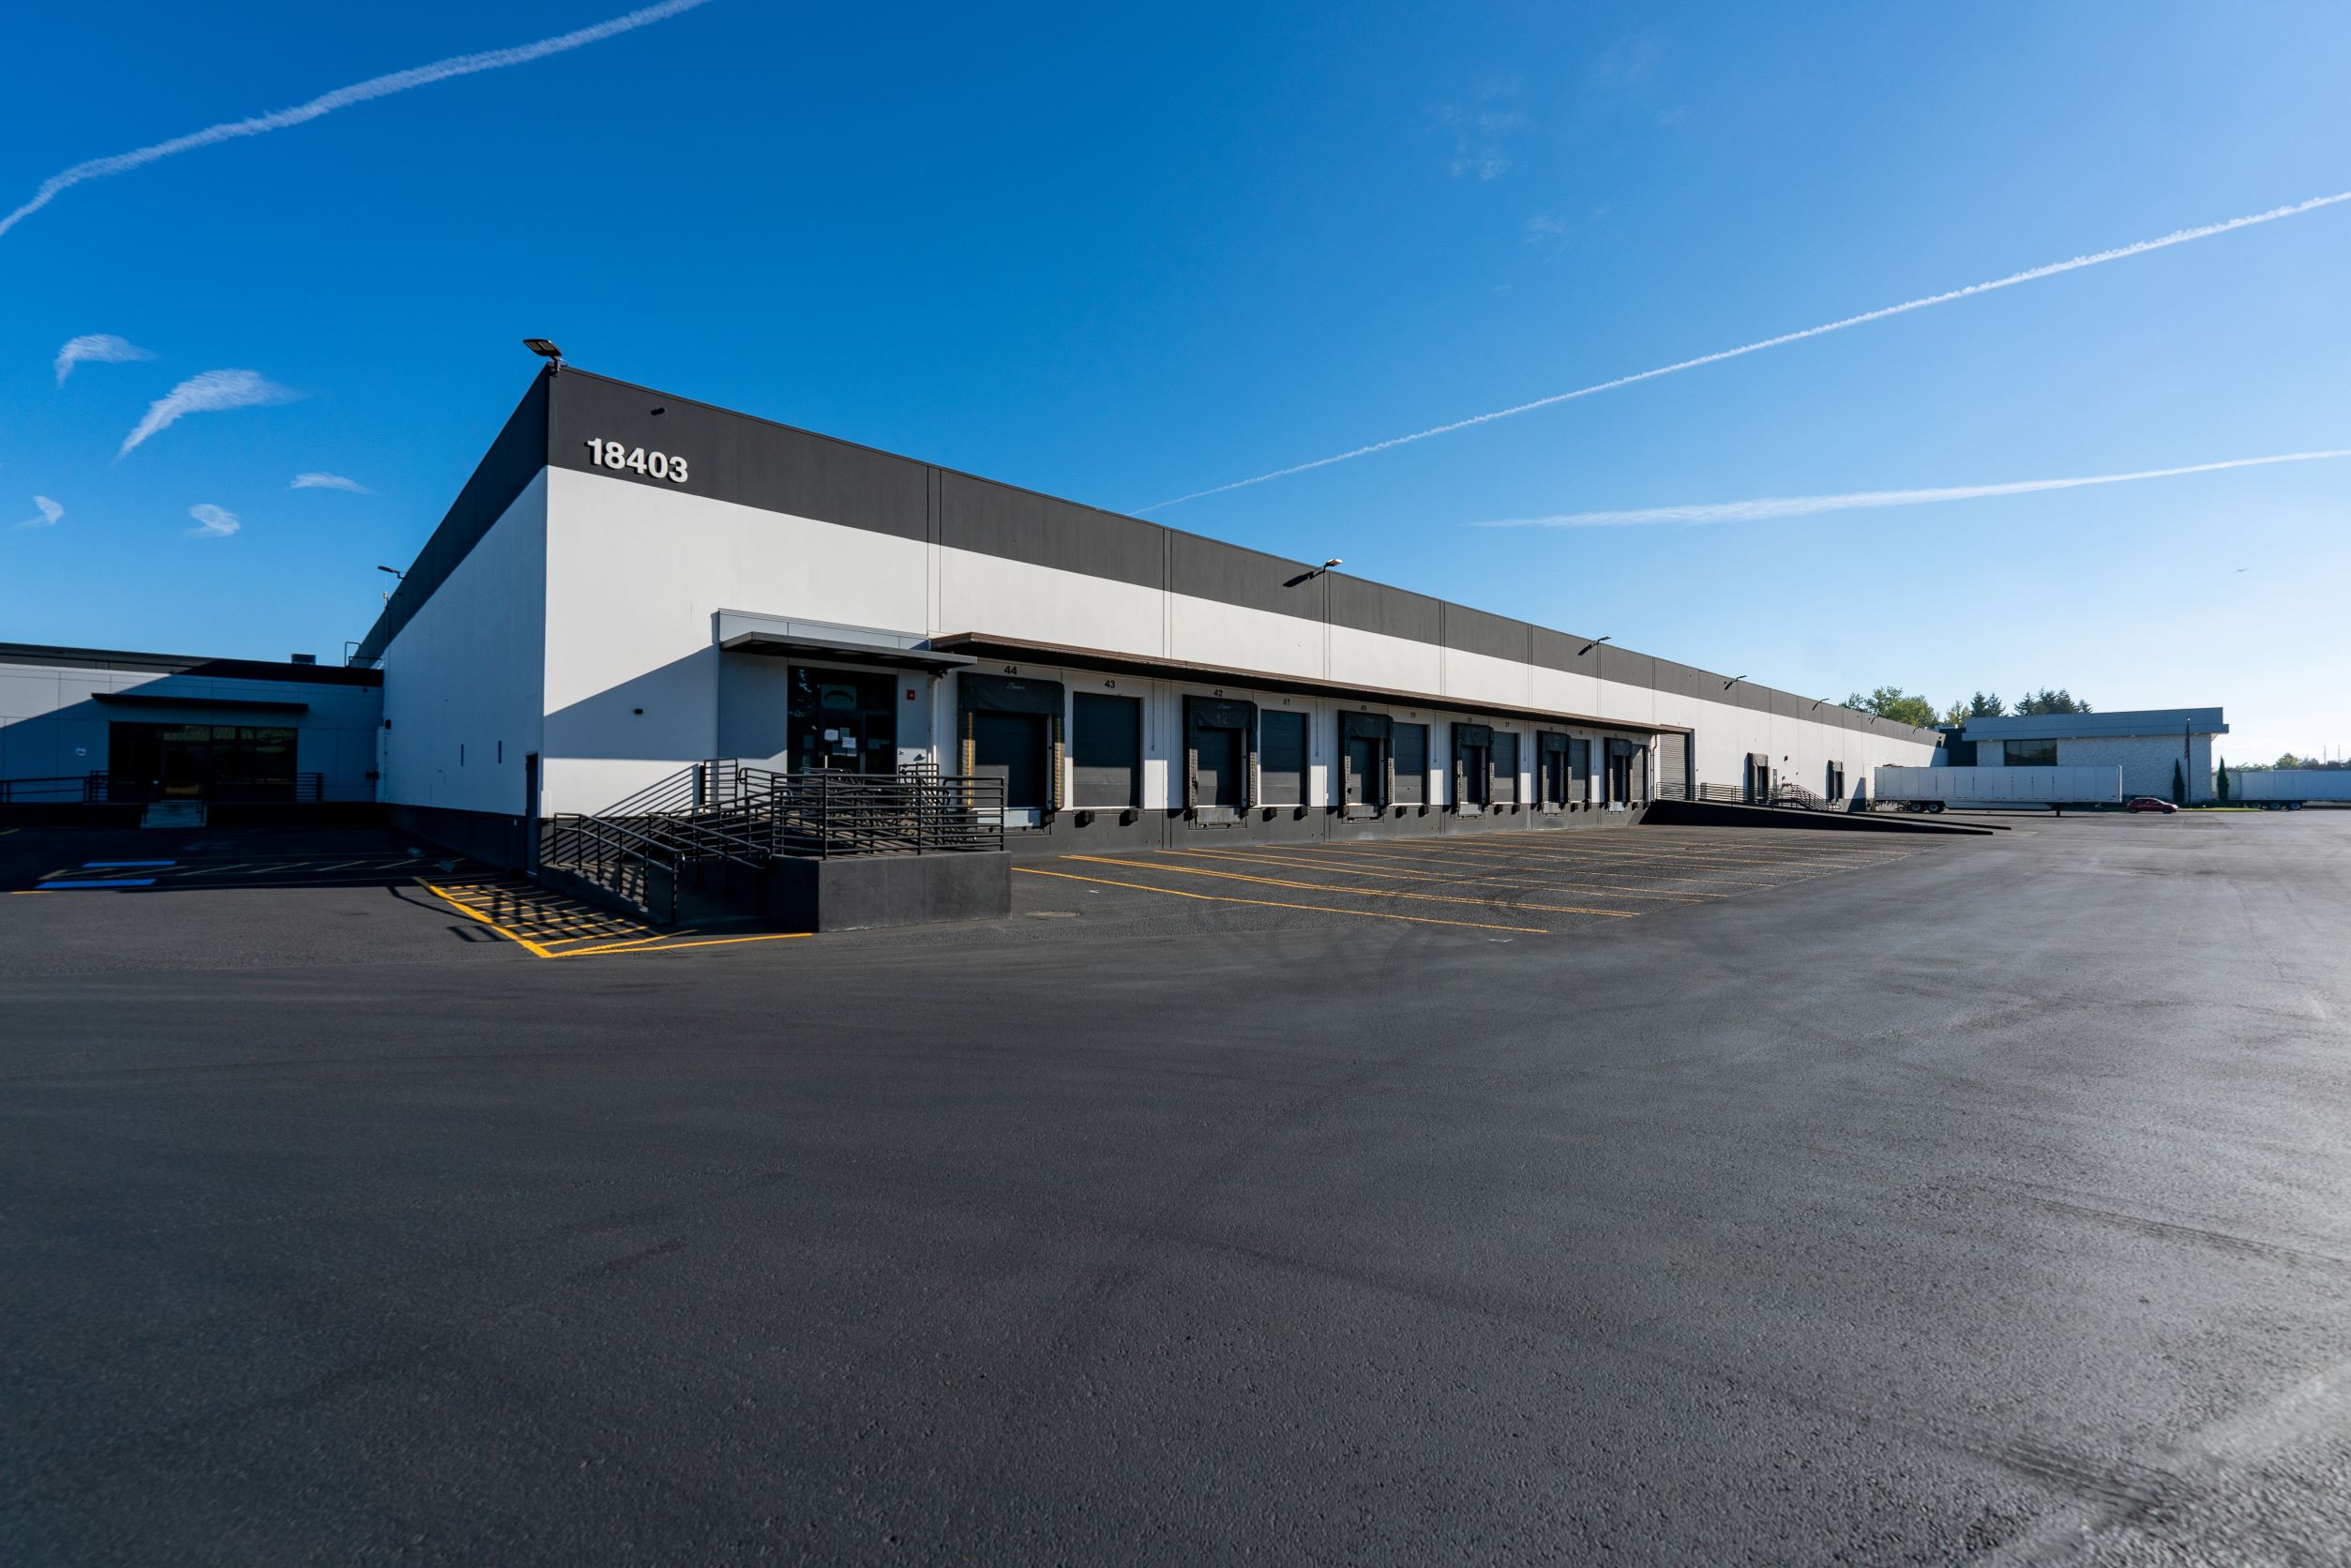 westcore-acquires-industrial-property-for-54-million-in-gresham-oregon